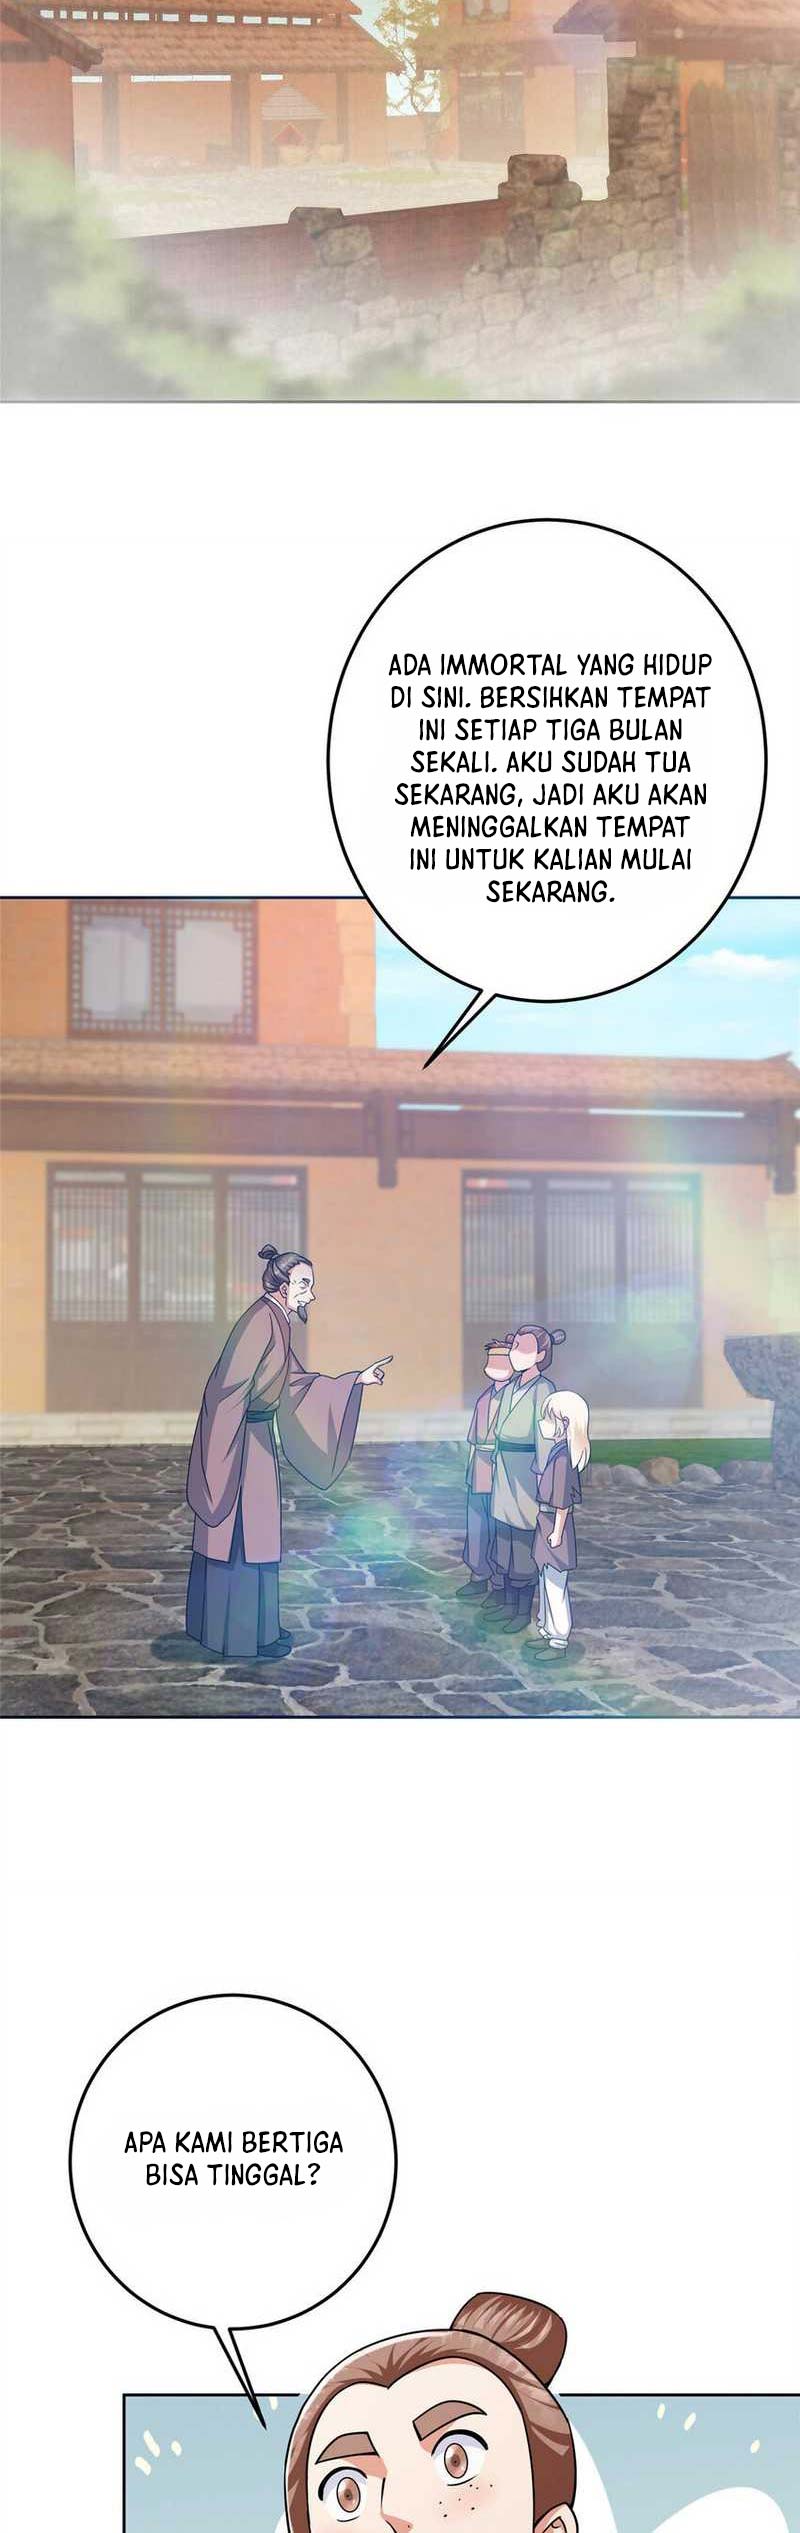 Keep A Low Profile, Sect Leader Chapter 171 Bahasa Indonesia